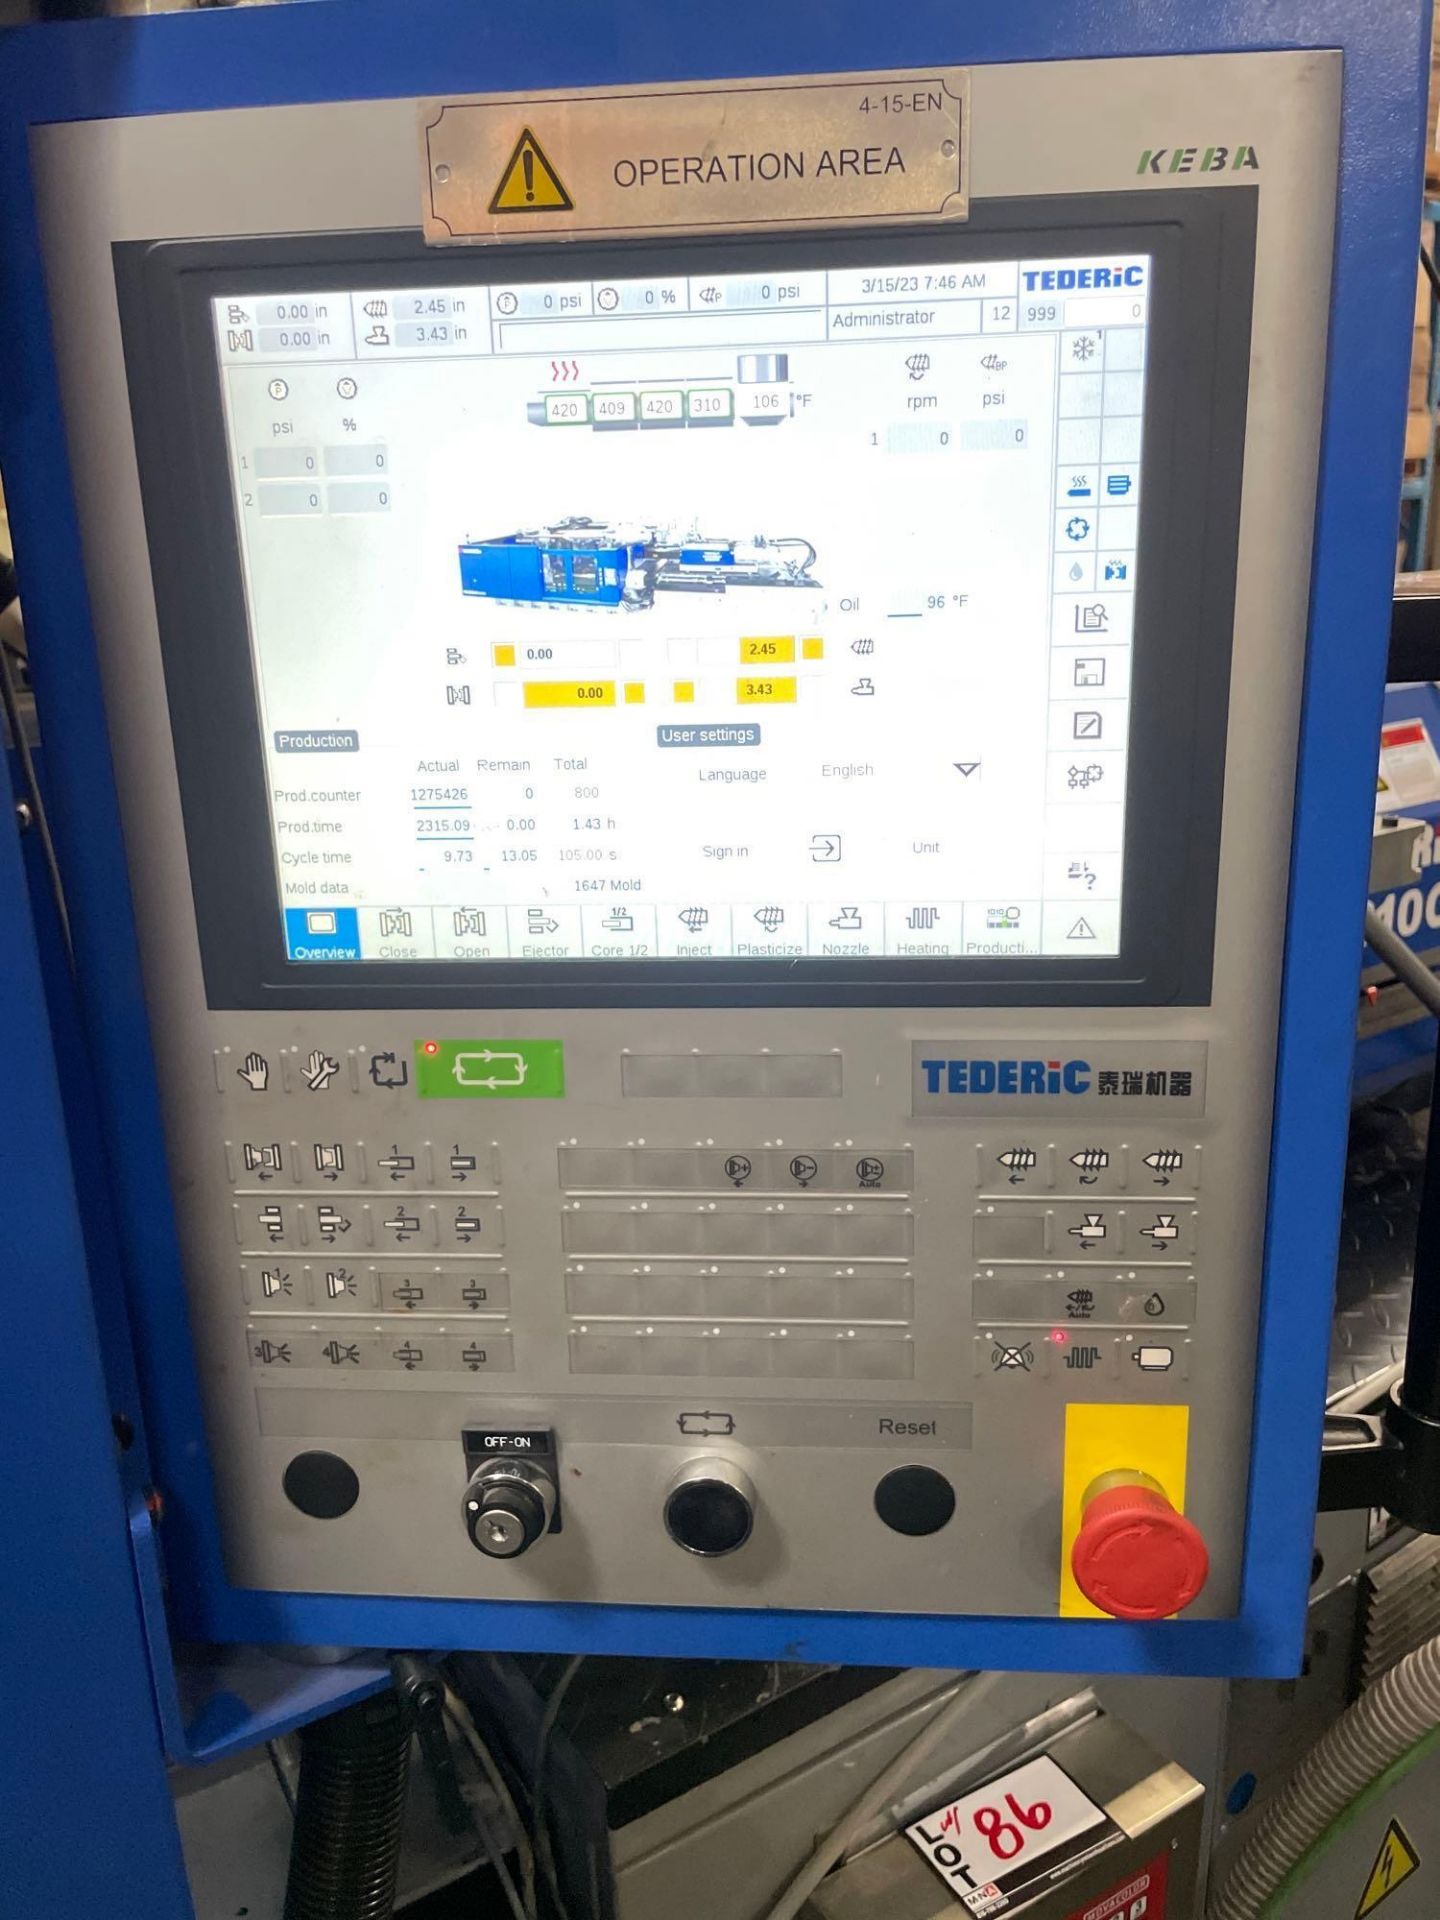 66 Ton Tederic D60 Plastic Injection Molder, Keba 12000 Control, s/n T00800275, New 2020 - Image 13 of 15